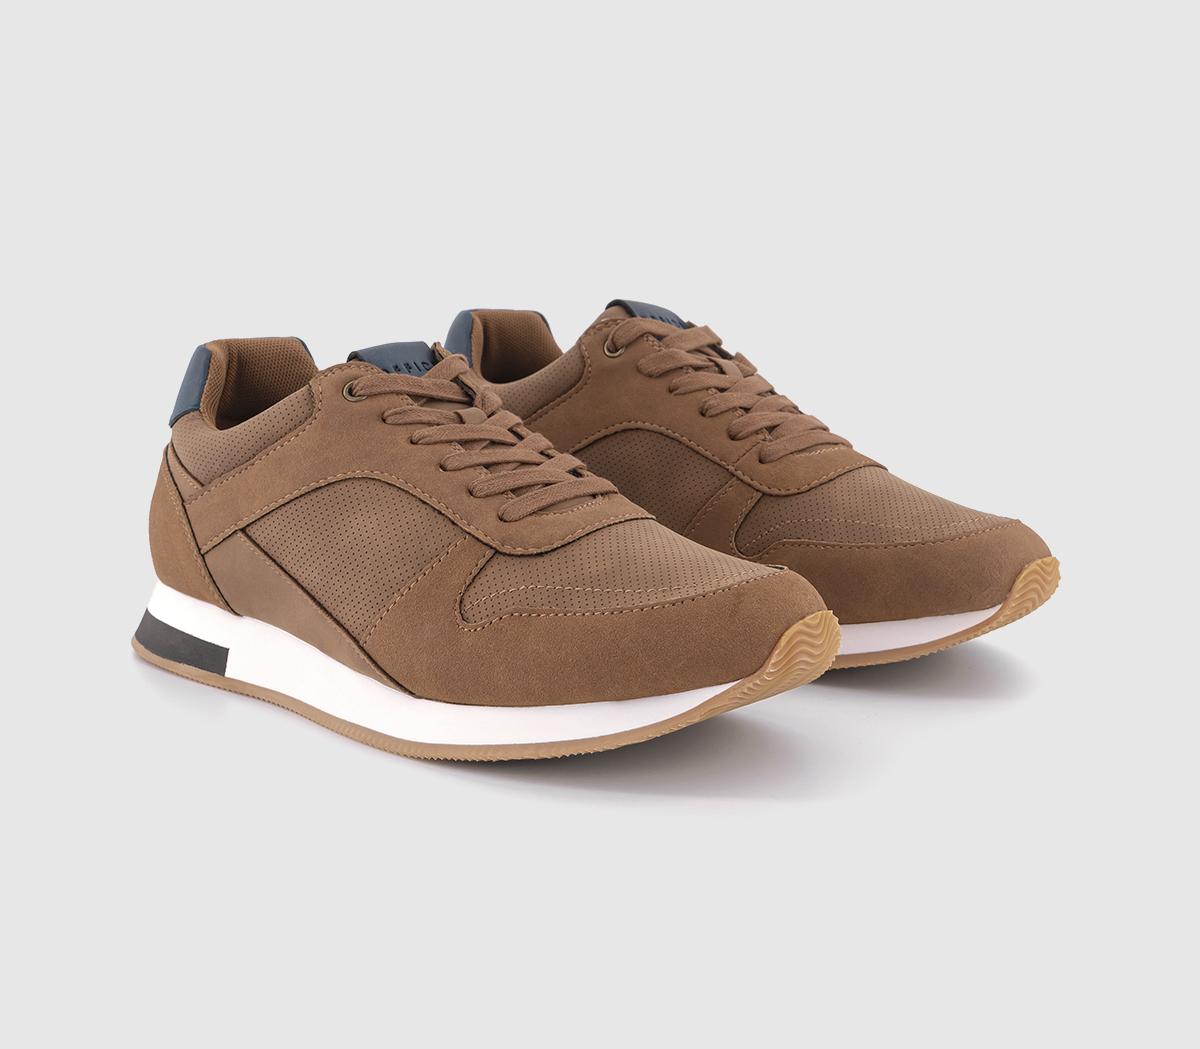 OFFICE Mens Cassidy Lightweight Trainers Tan, 6